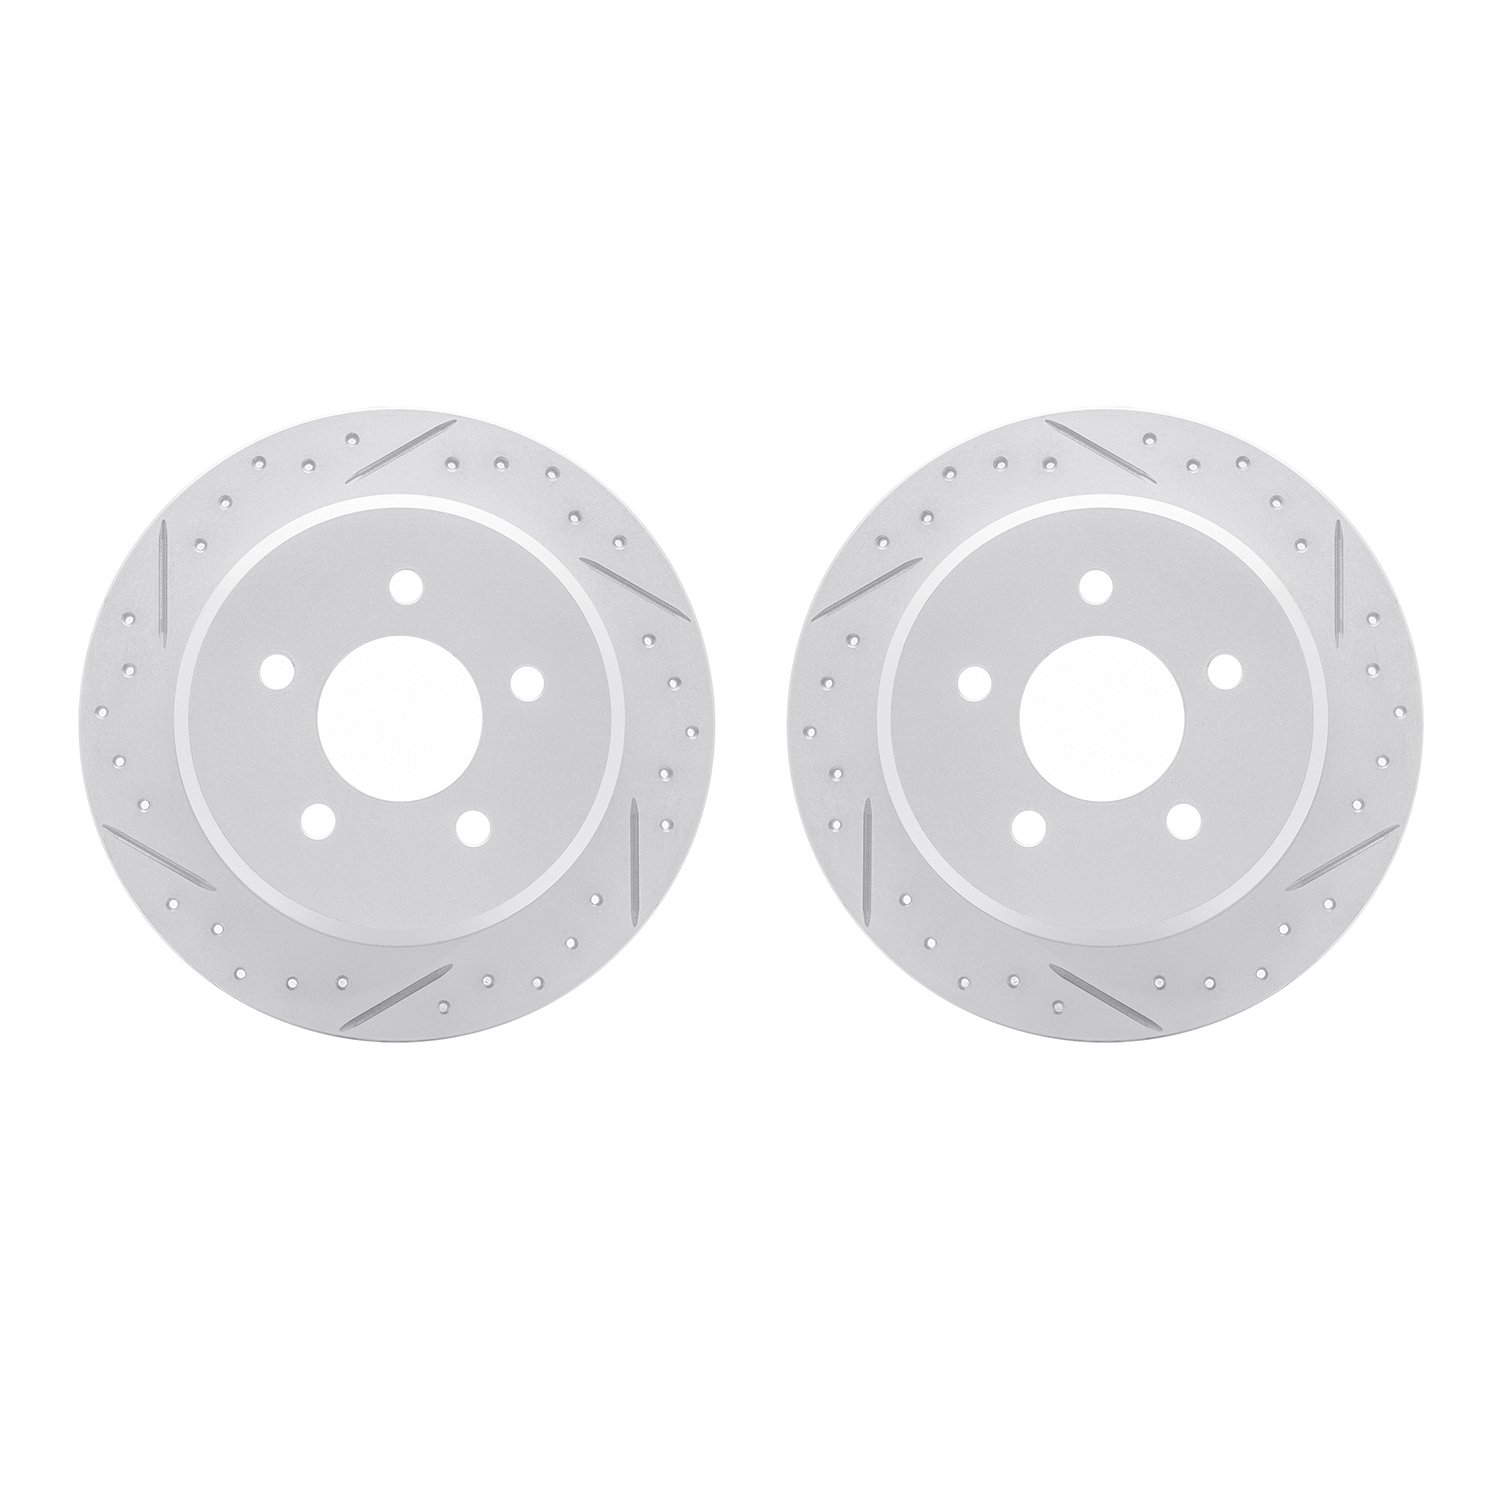 2002-54140 Geoperformance Drilled/Slotted Brake Rotors, 1995-2002 Ford/Lincoln/Mercury/Mazda, Position: Rear